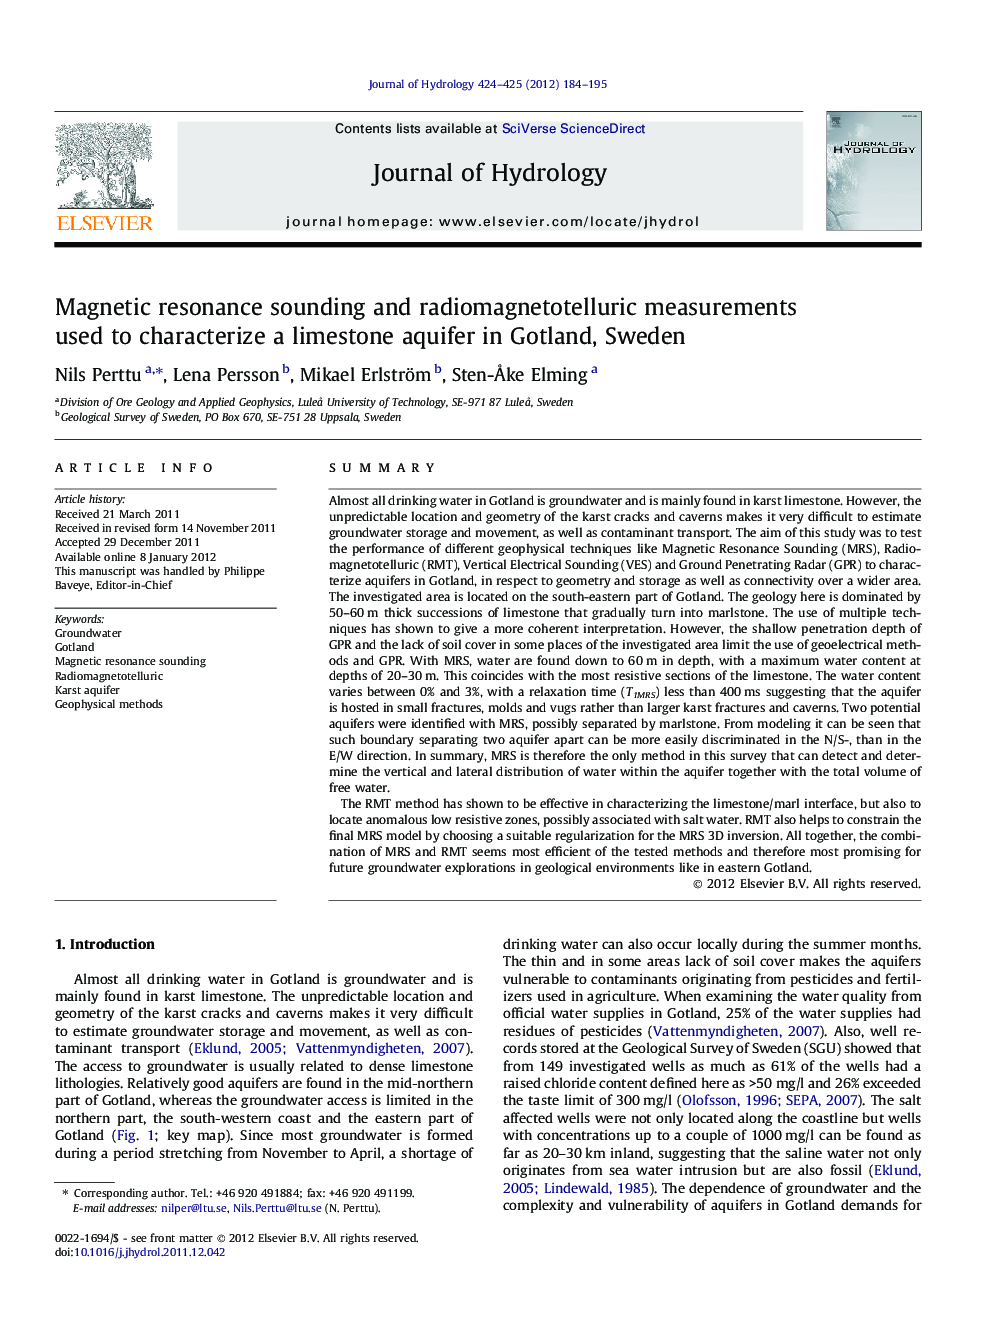 Magnetic resonance sounding and radiomagnetotelluric measurements used to characterize a limestone aquifer in Gotland, Sweden